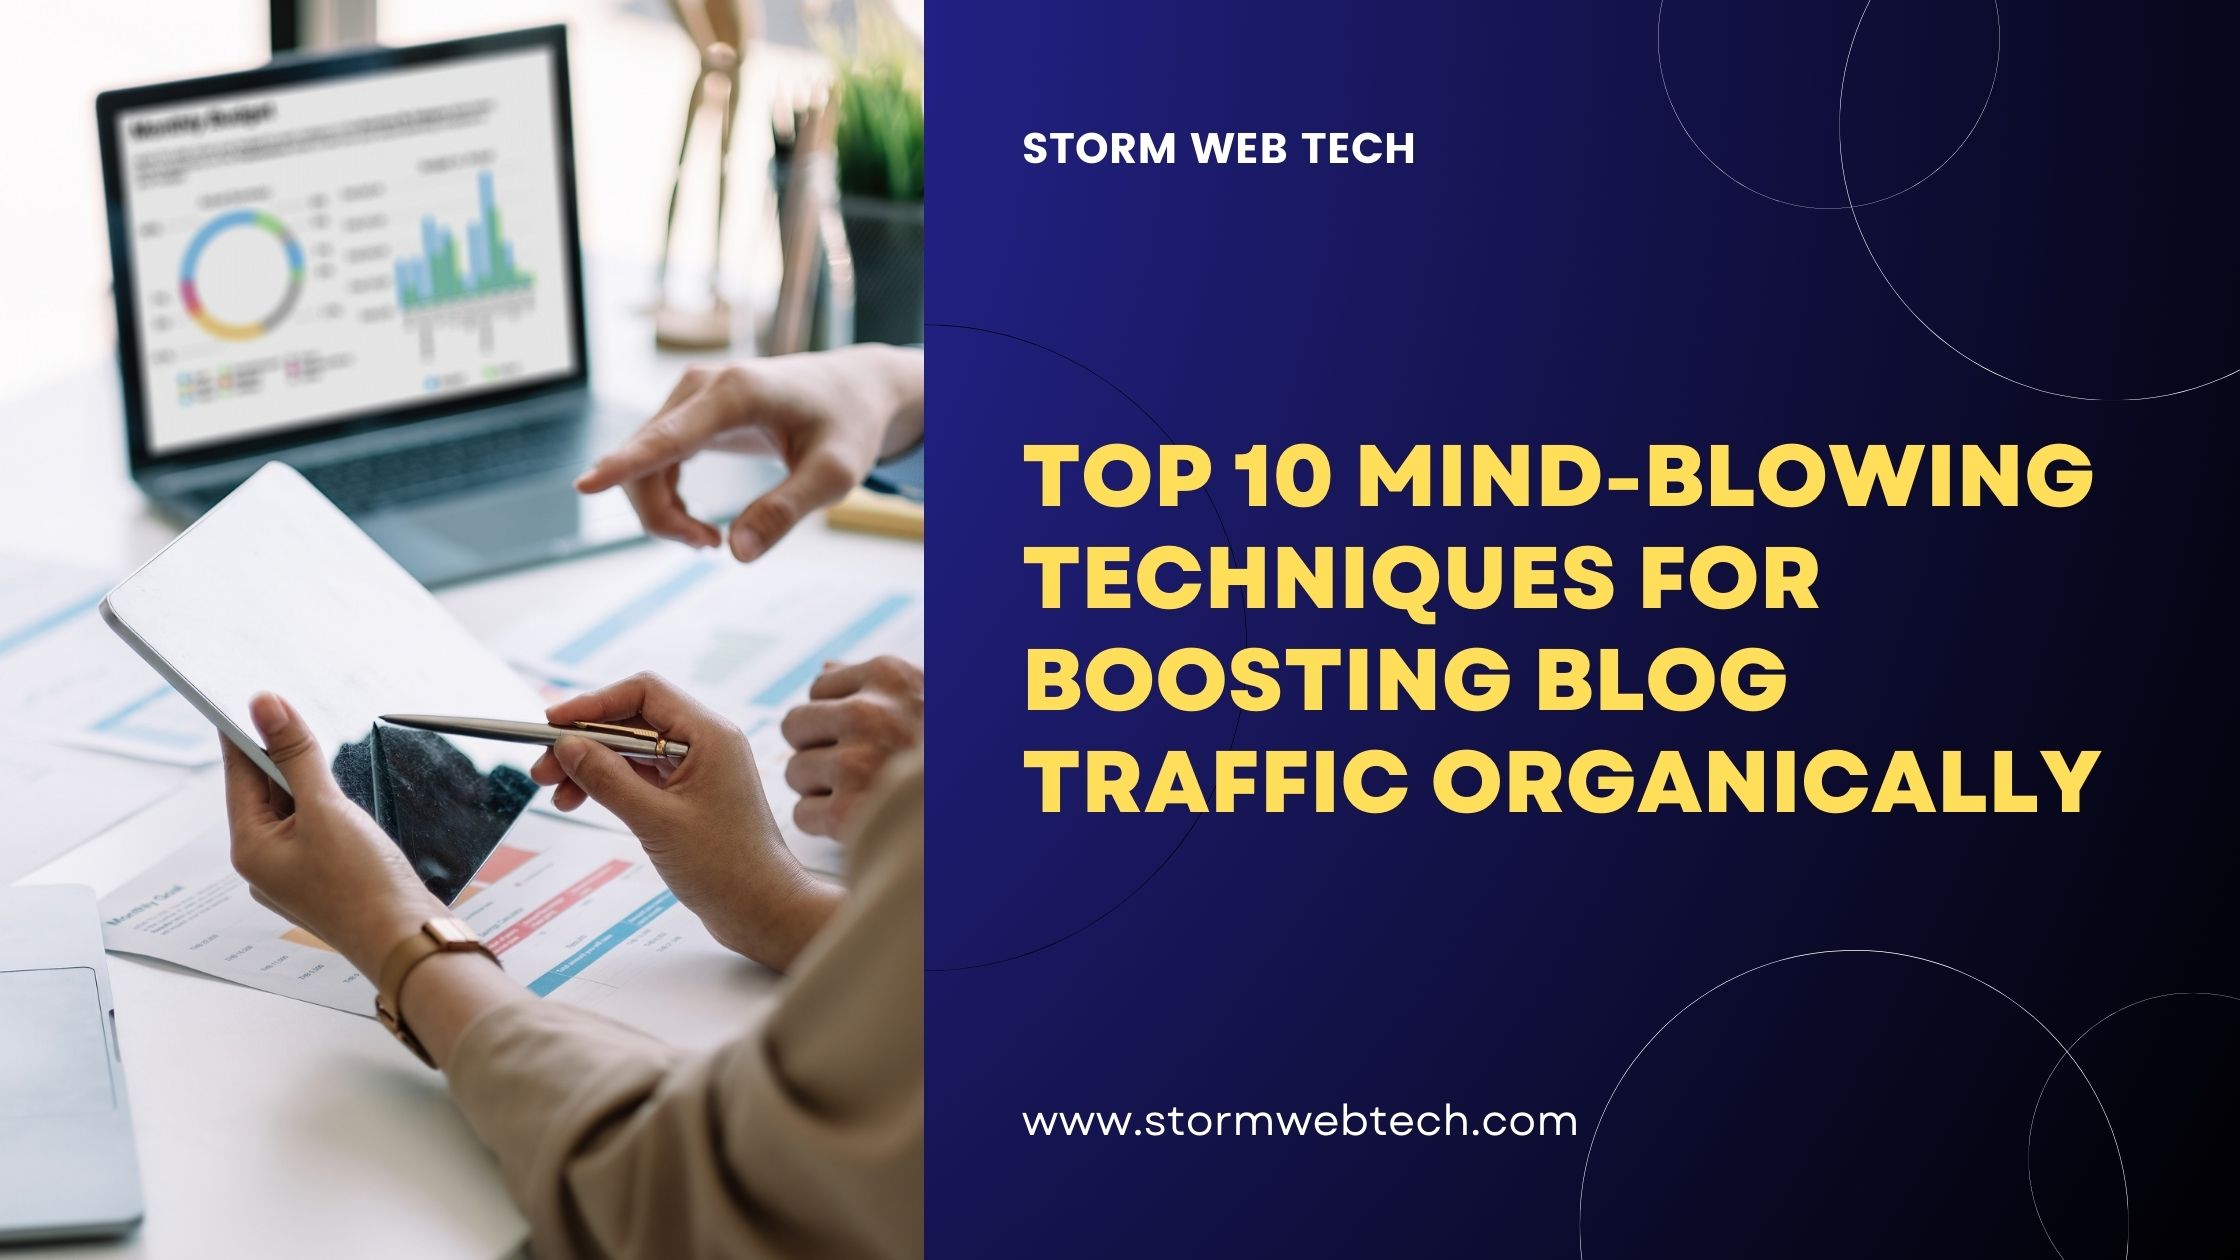 top 10 mind-blowing techniques for boosting blog traffic organically that will transform your approach to content creation and traffic generation